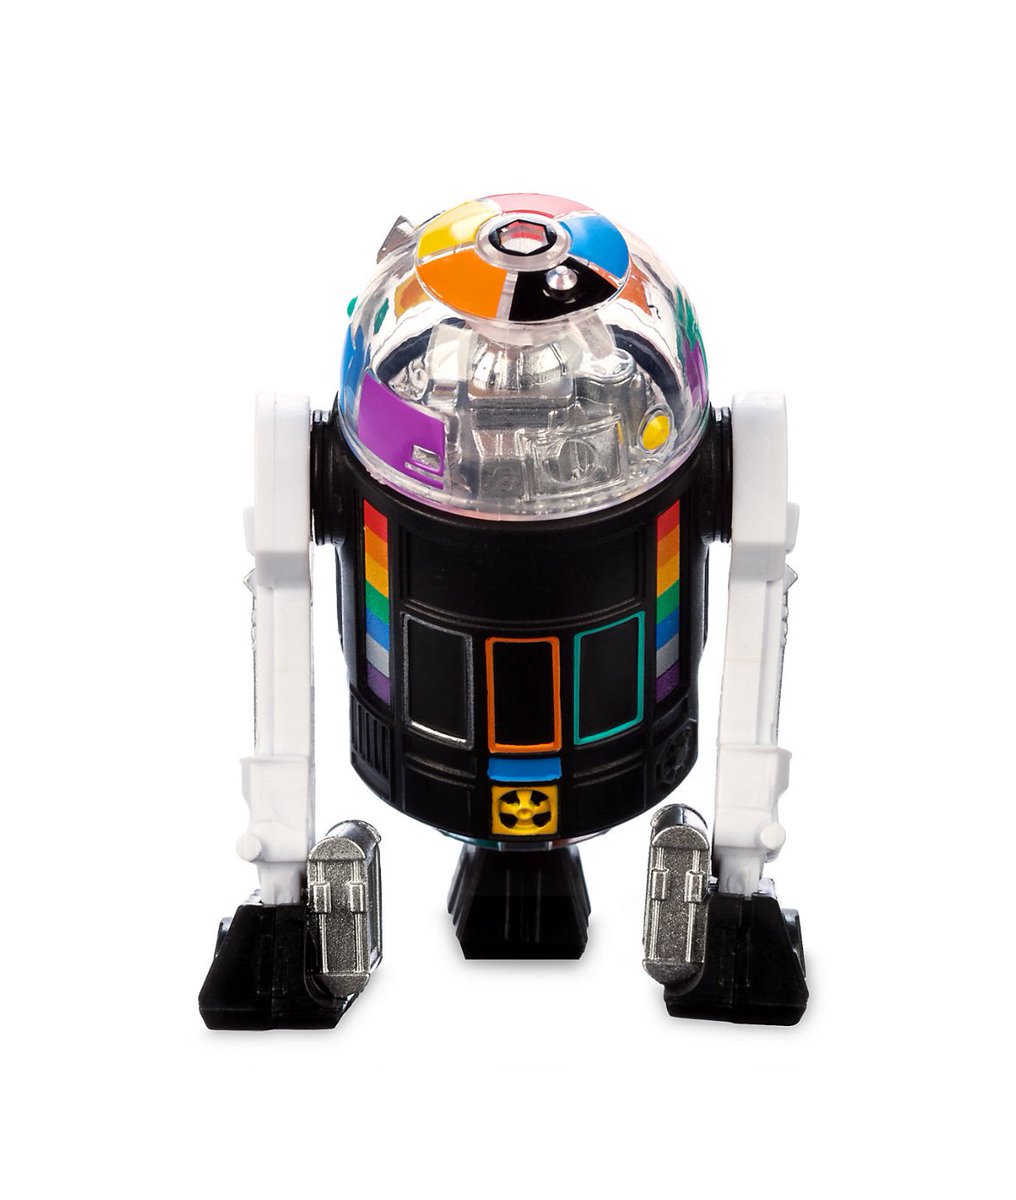 Star Wars Droid Factory 3.75” Pride Collection R3-RN8W is in stock at the Disney Store ($14.99) - bit.ly/4duNToy